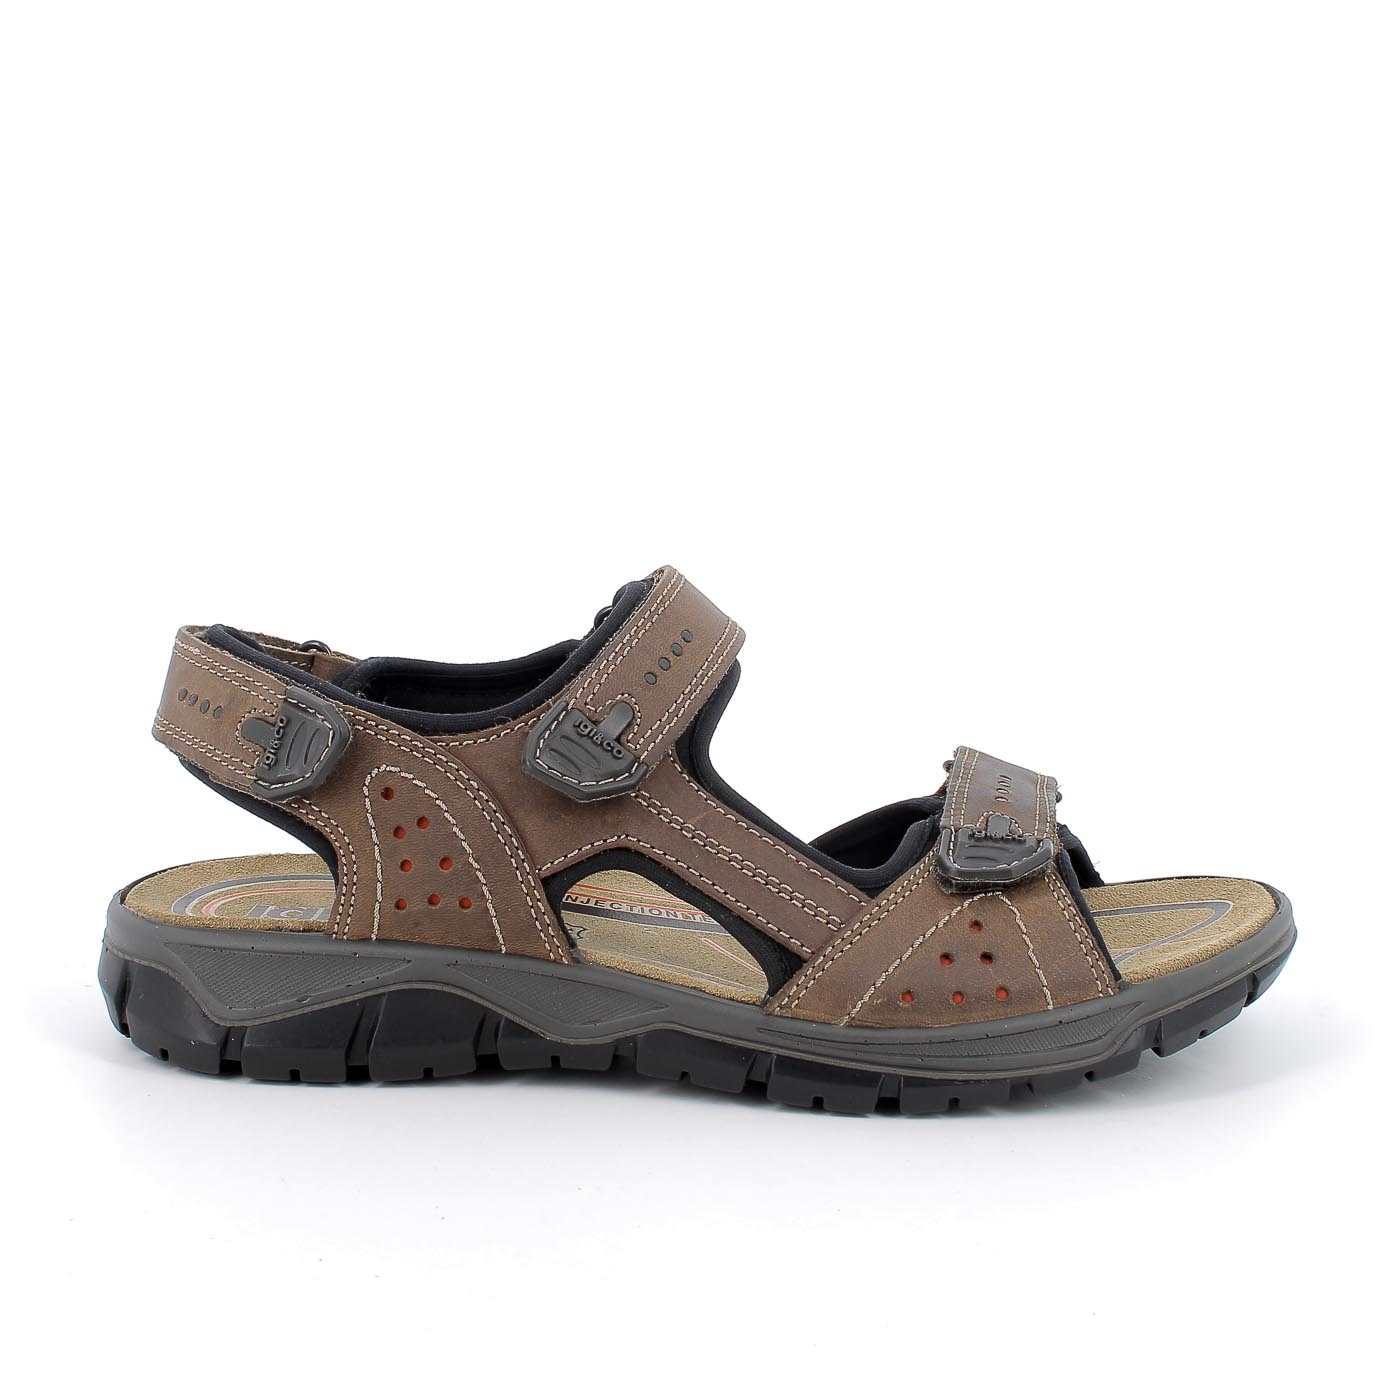 Igi & Co Men's Brown Leather Sandals with Memory Foam and Arch Support